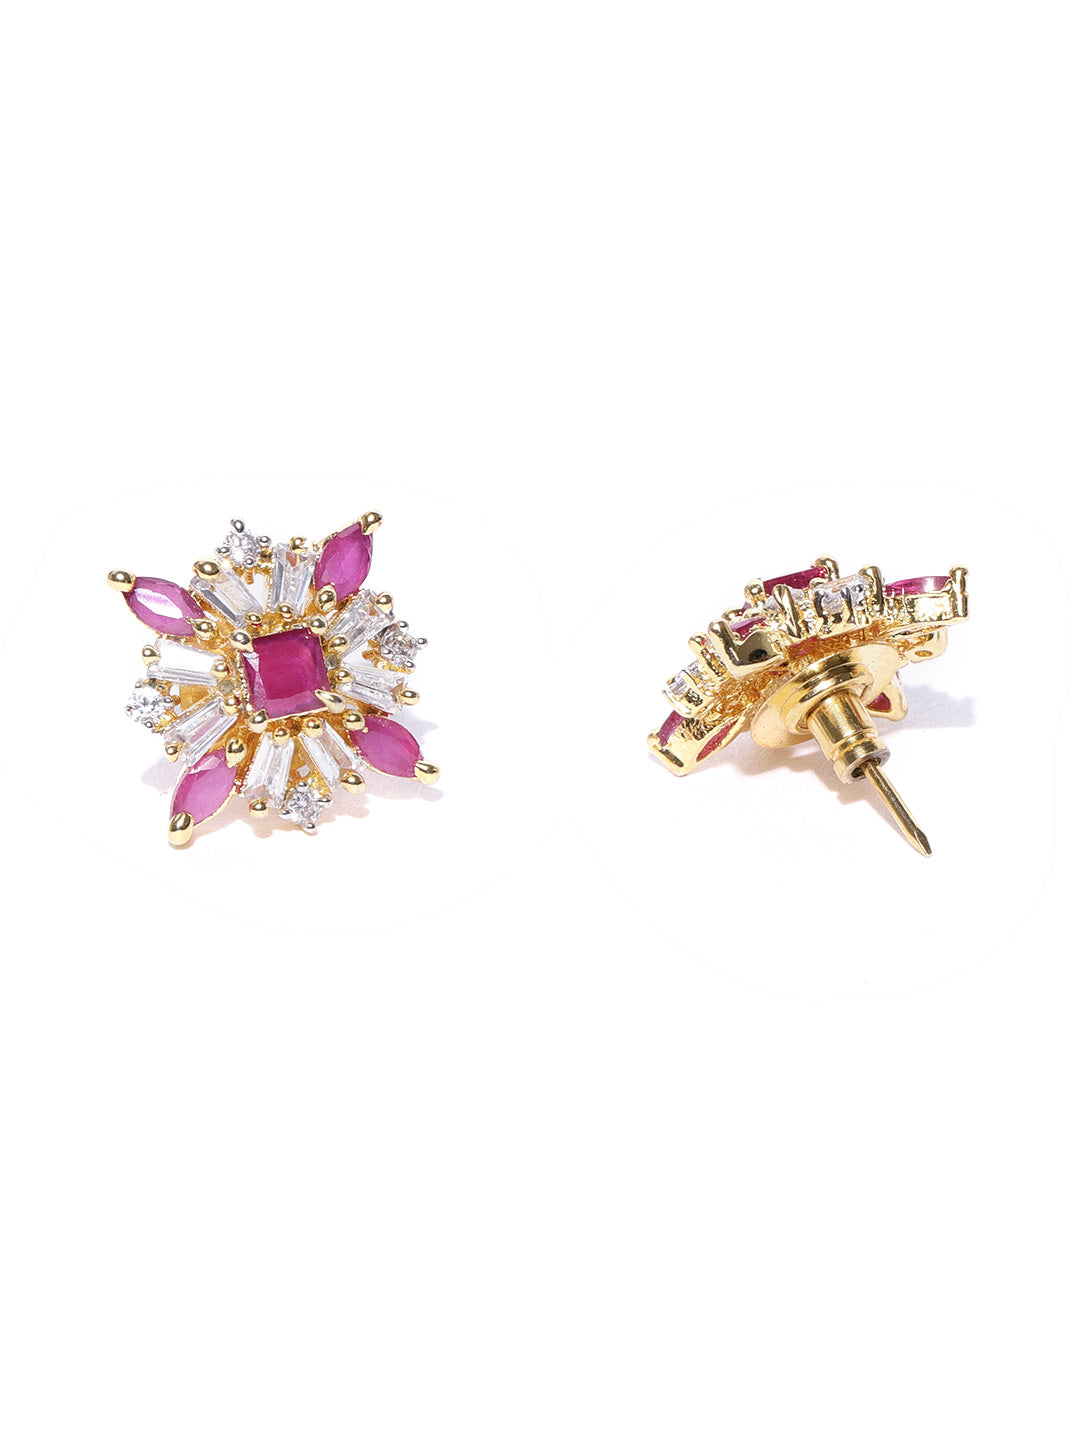 Designer Floral Shaped Pink And White American Diamond Stud Earring For Women And Girls